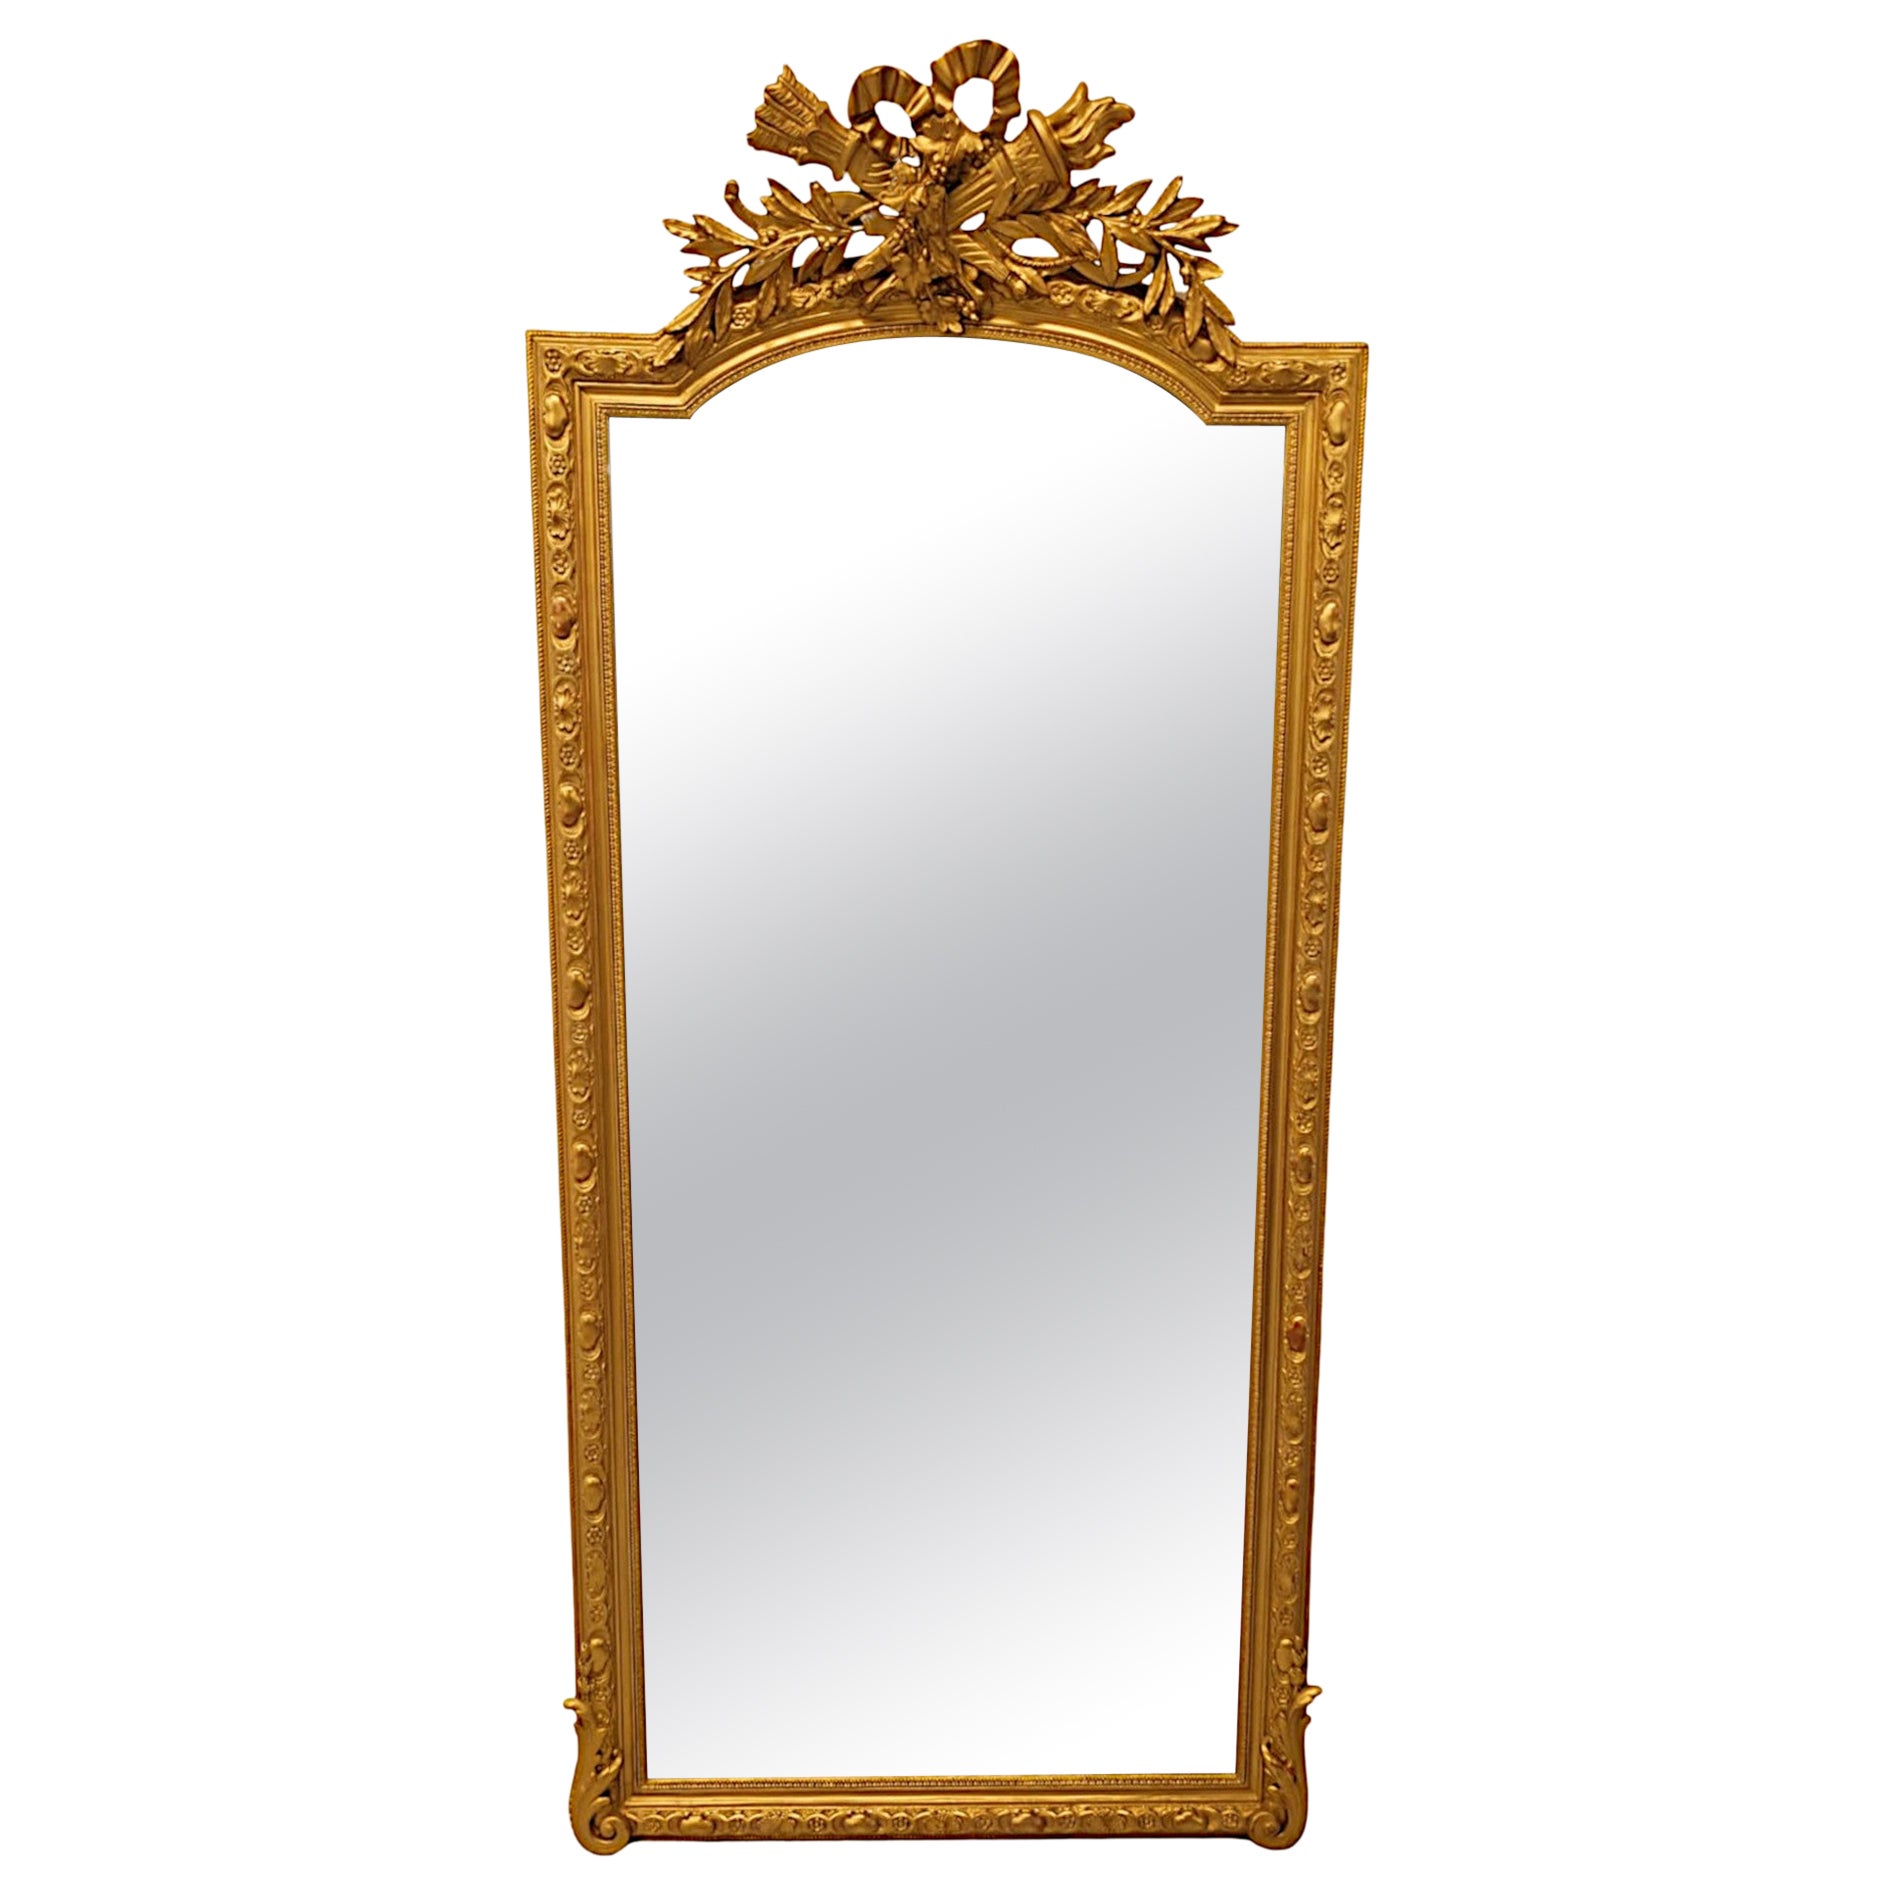 A Very Fine Tall 19th Century Giltwood Pier or Dressing Mirror For Sale